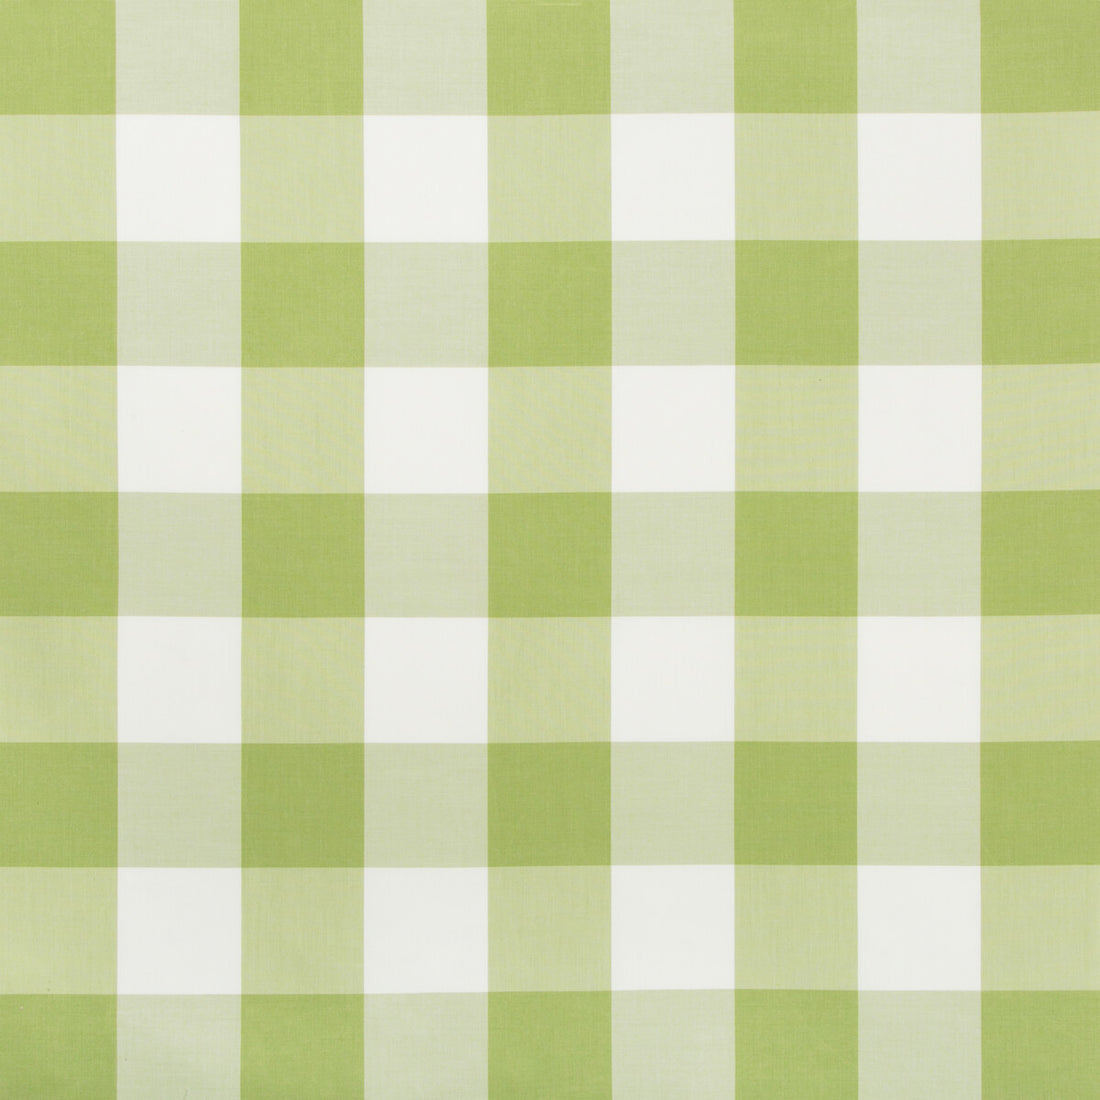 Kravet Basics fabric in 35371-3 color - pattern 35371.3.0 - by Kravet Basics in the Performance Indoor Outdoor collection